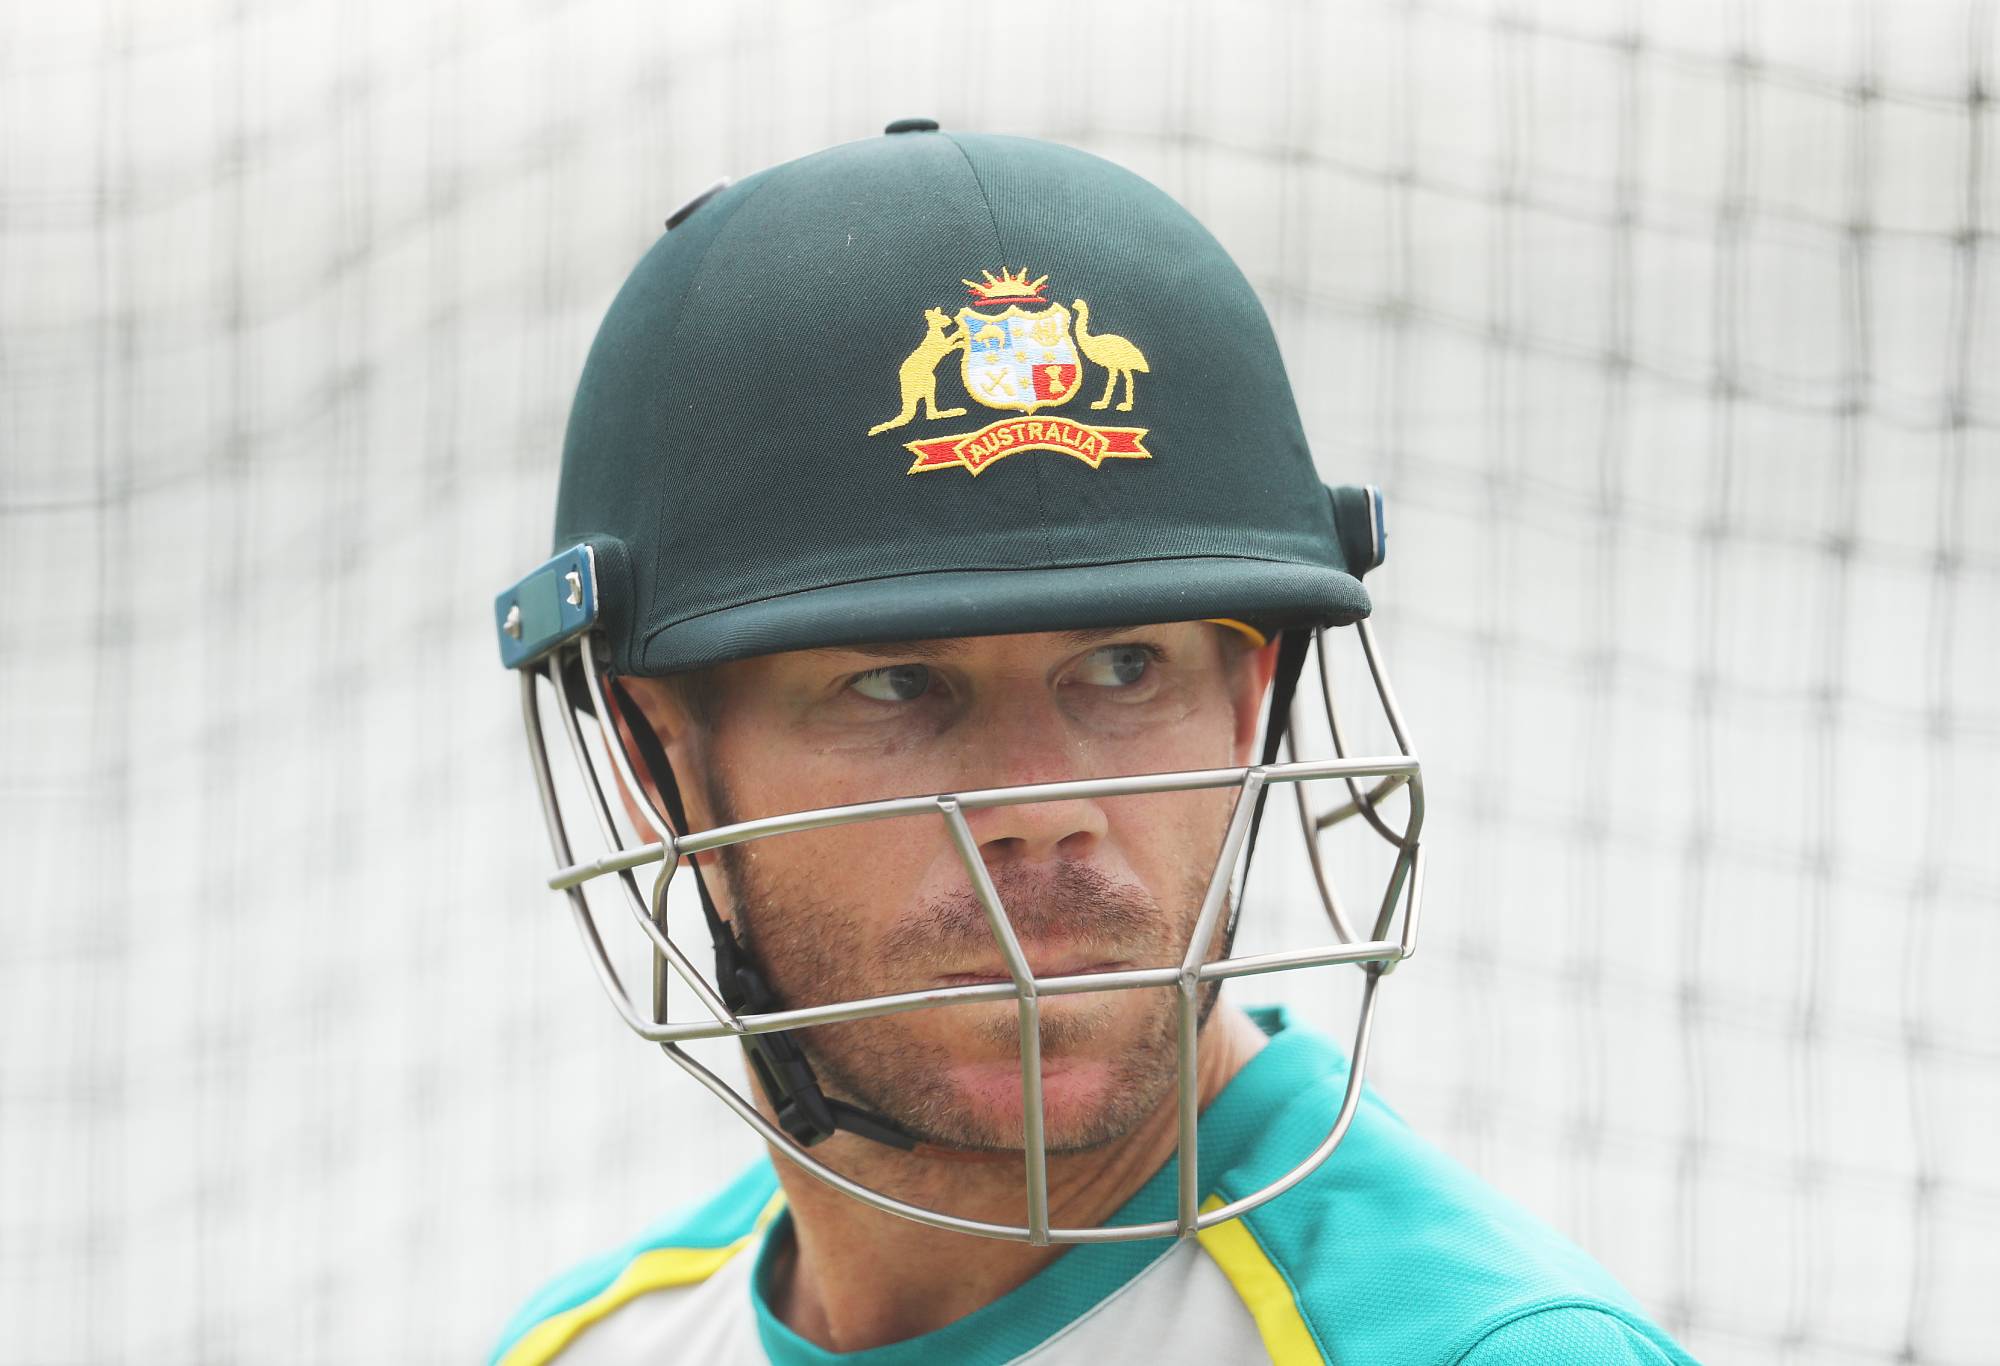 David Warner looks on during an Australian Ashes squad training session at Sydney Cricket Ground on January 04, 2022 in Sydney, Australia. (Photo by Mark Metcalfe/Getty Images)